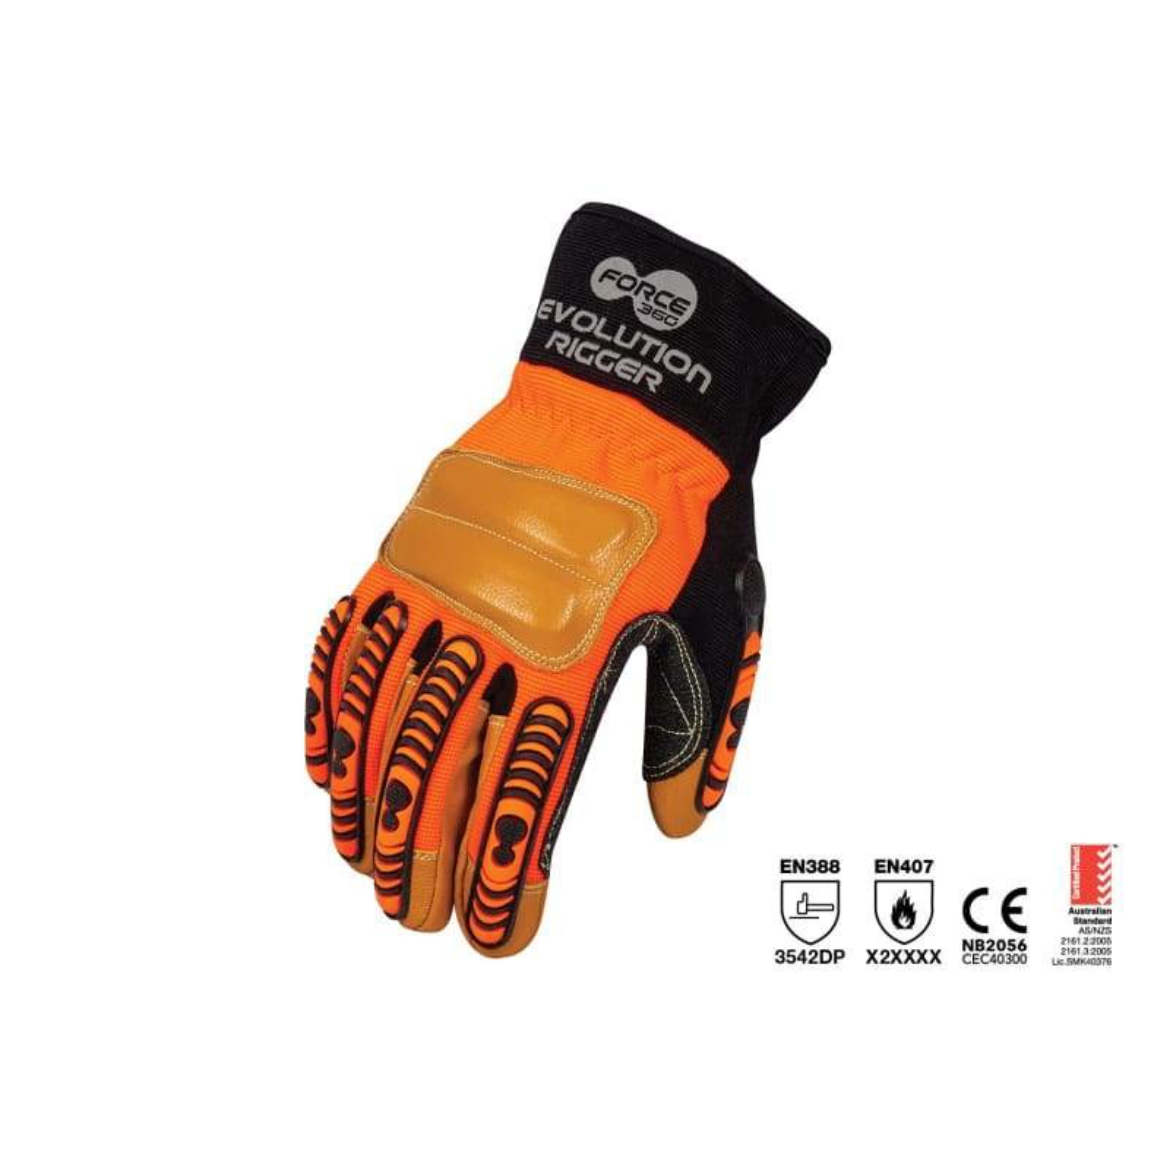 Picture of Force360 Evolution Rigger Cut 5 Glove